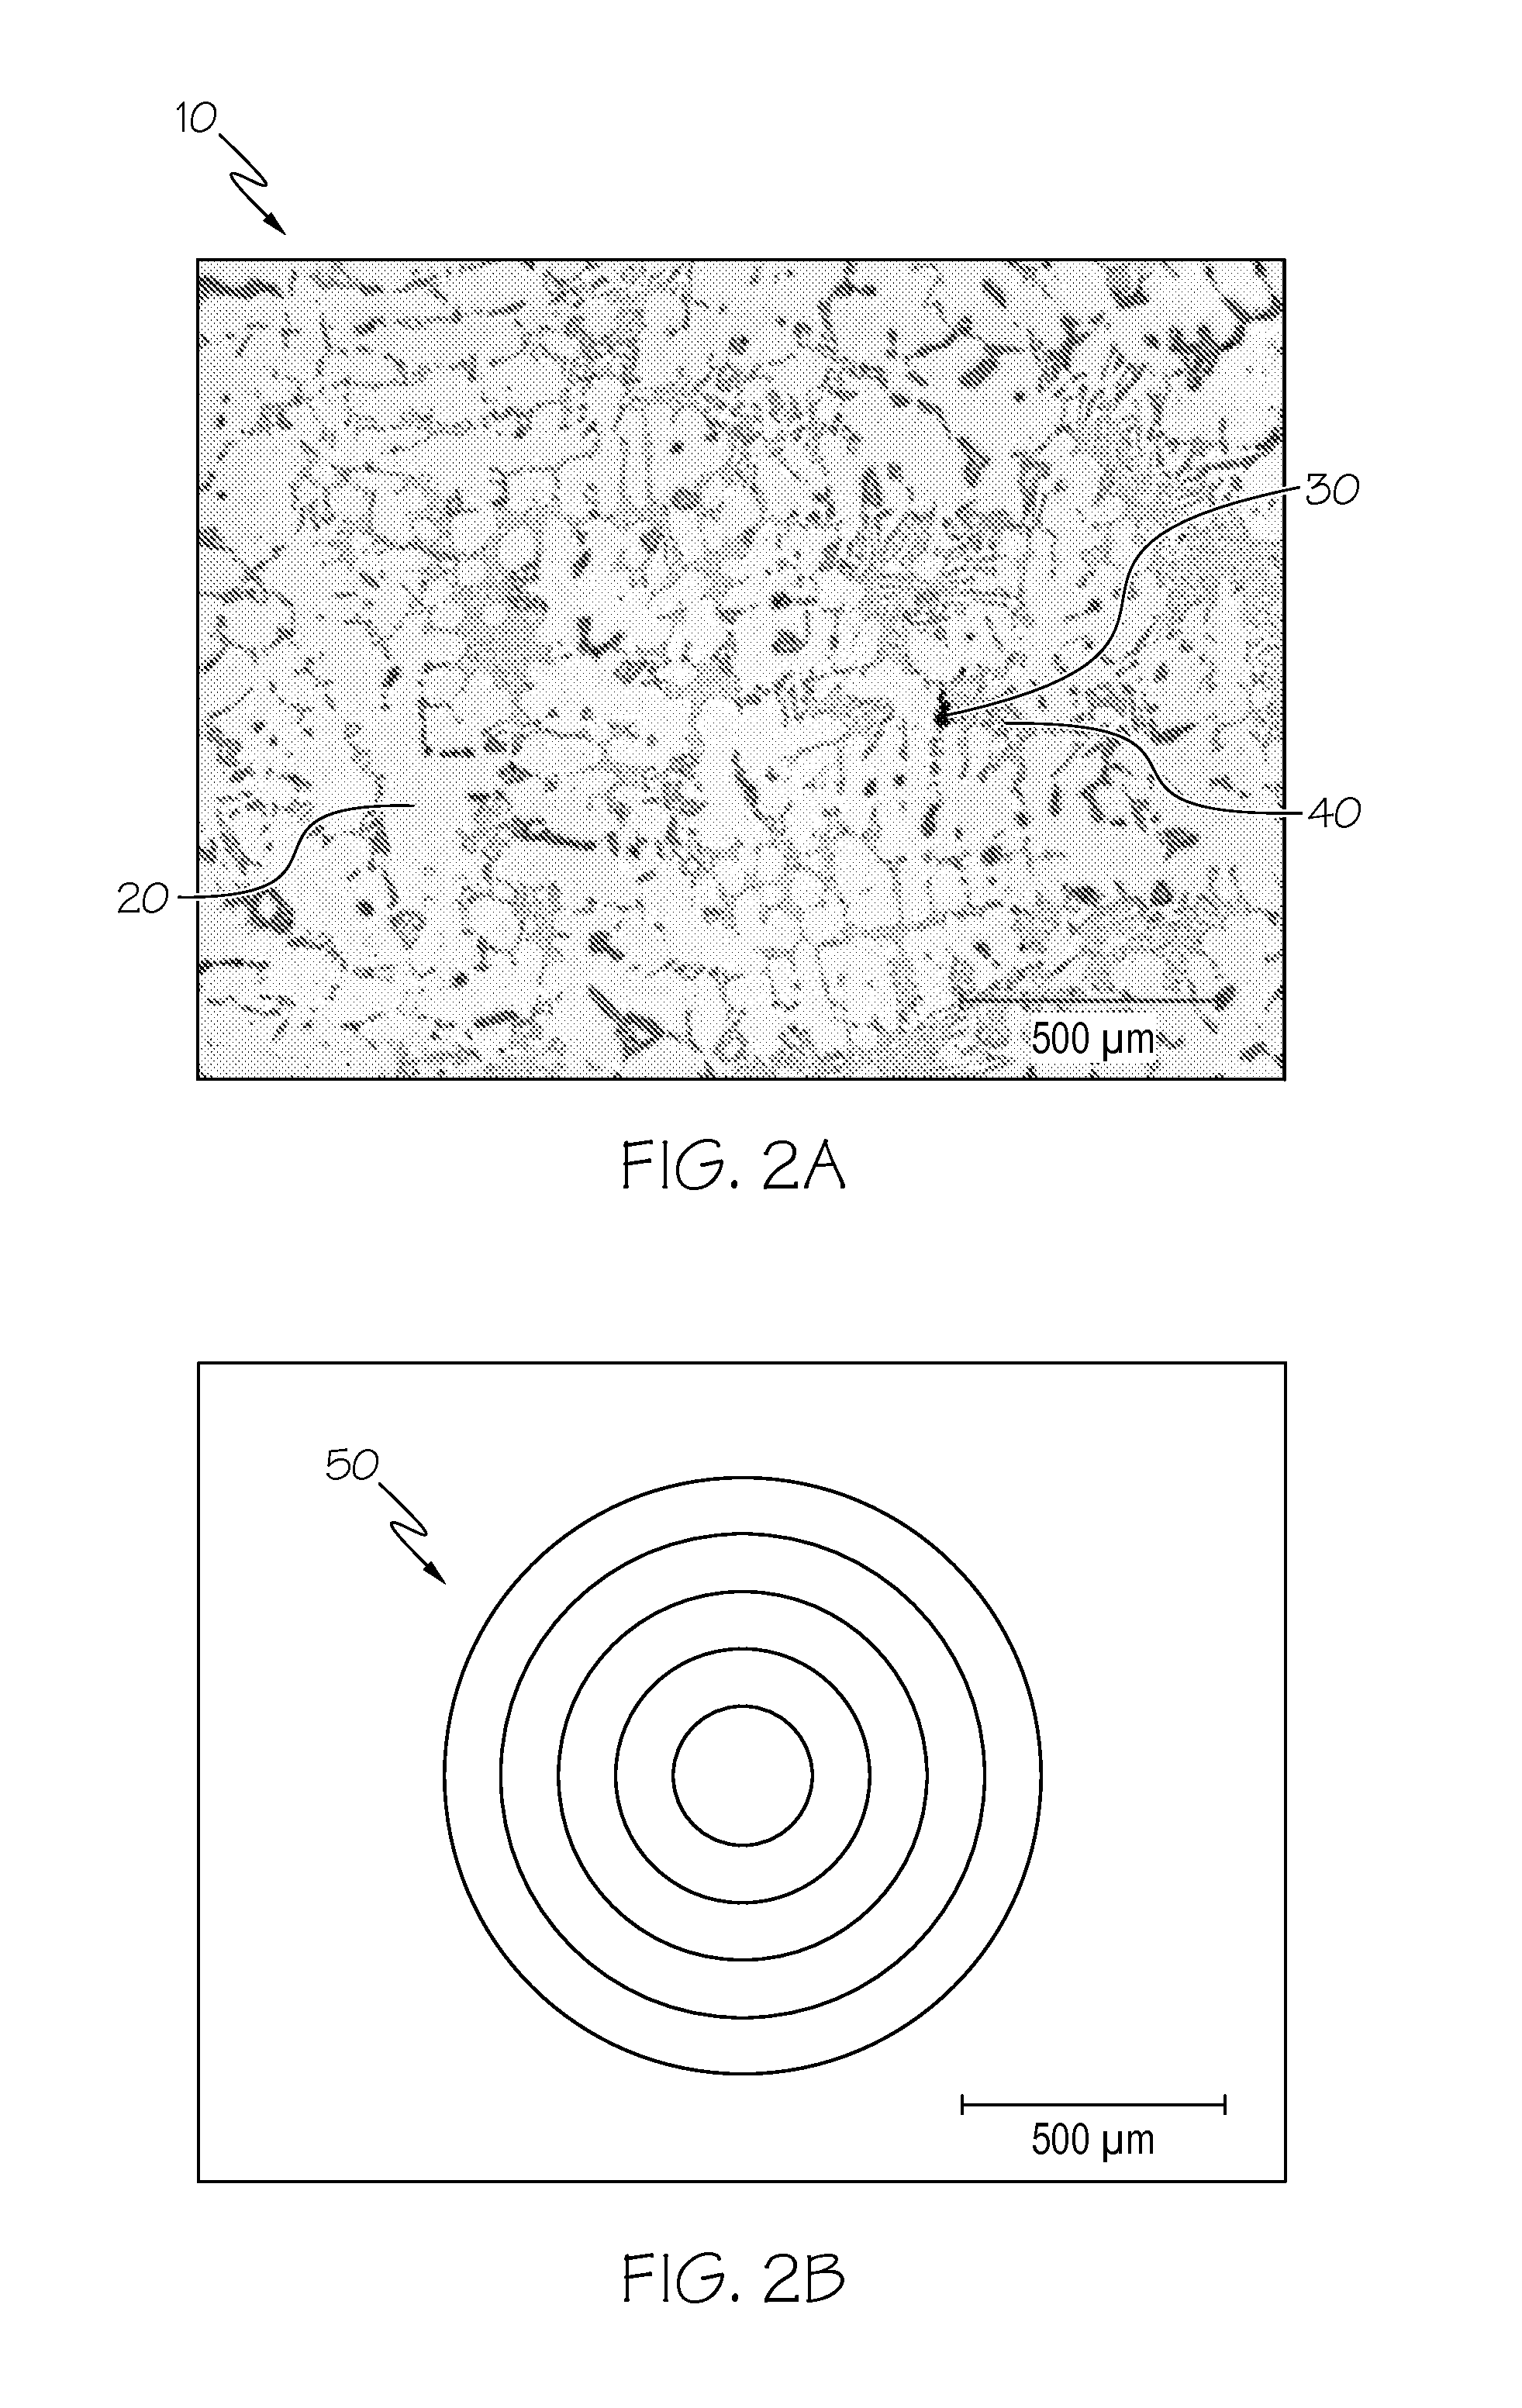 Method for automatic quantification of dendrite arm spacing in dendritic microstructures